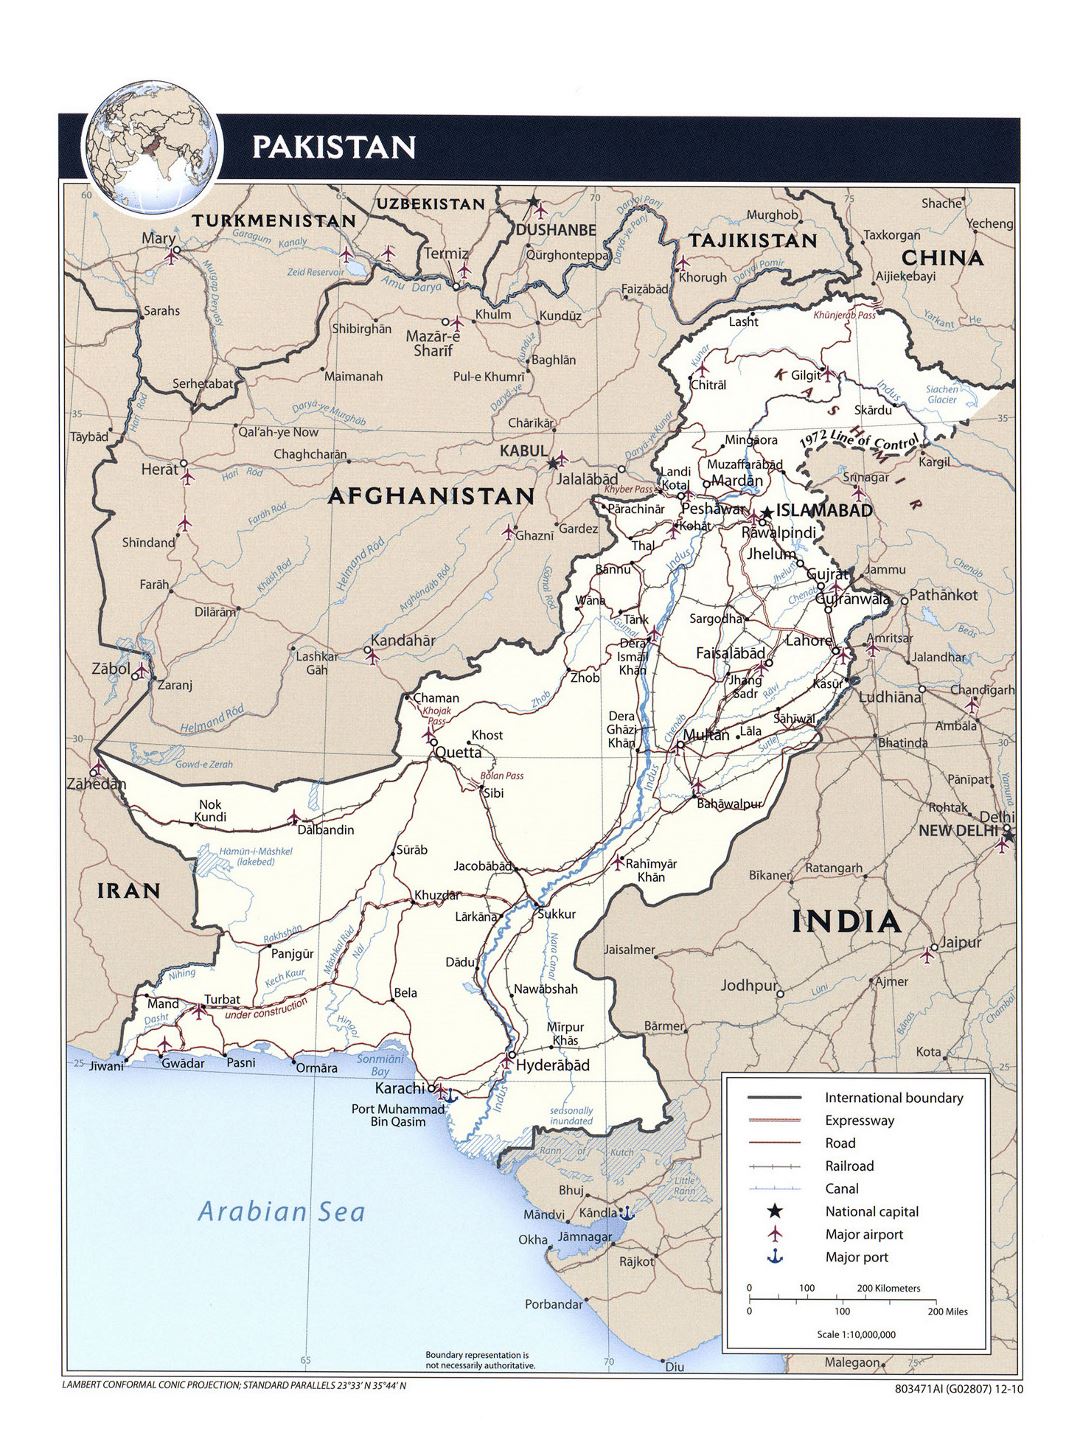 Detailed political map of Pakistan with roads, railroads, major cities, airports, ports and other marks - 2010